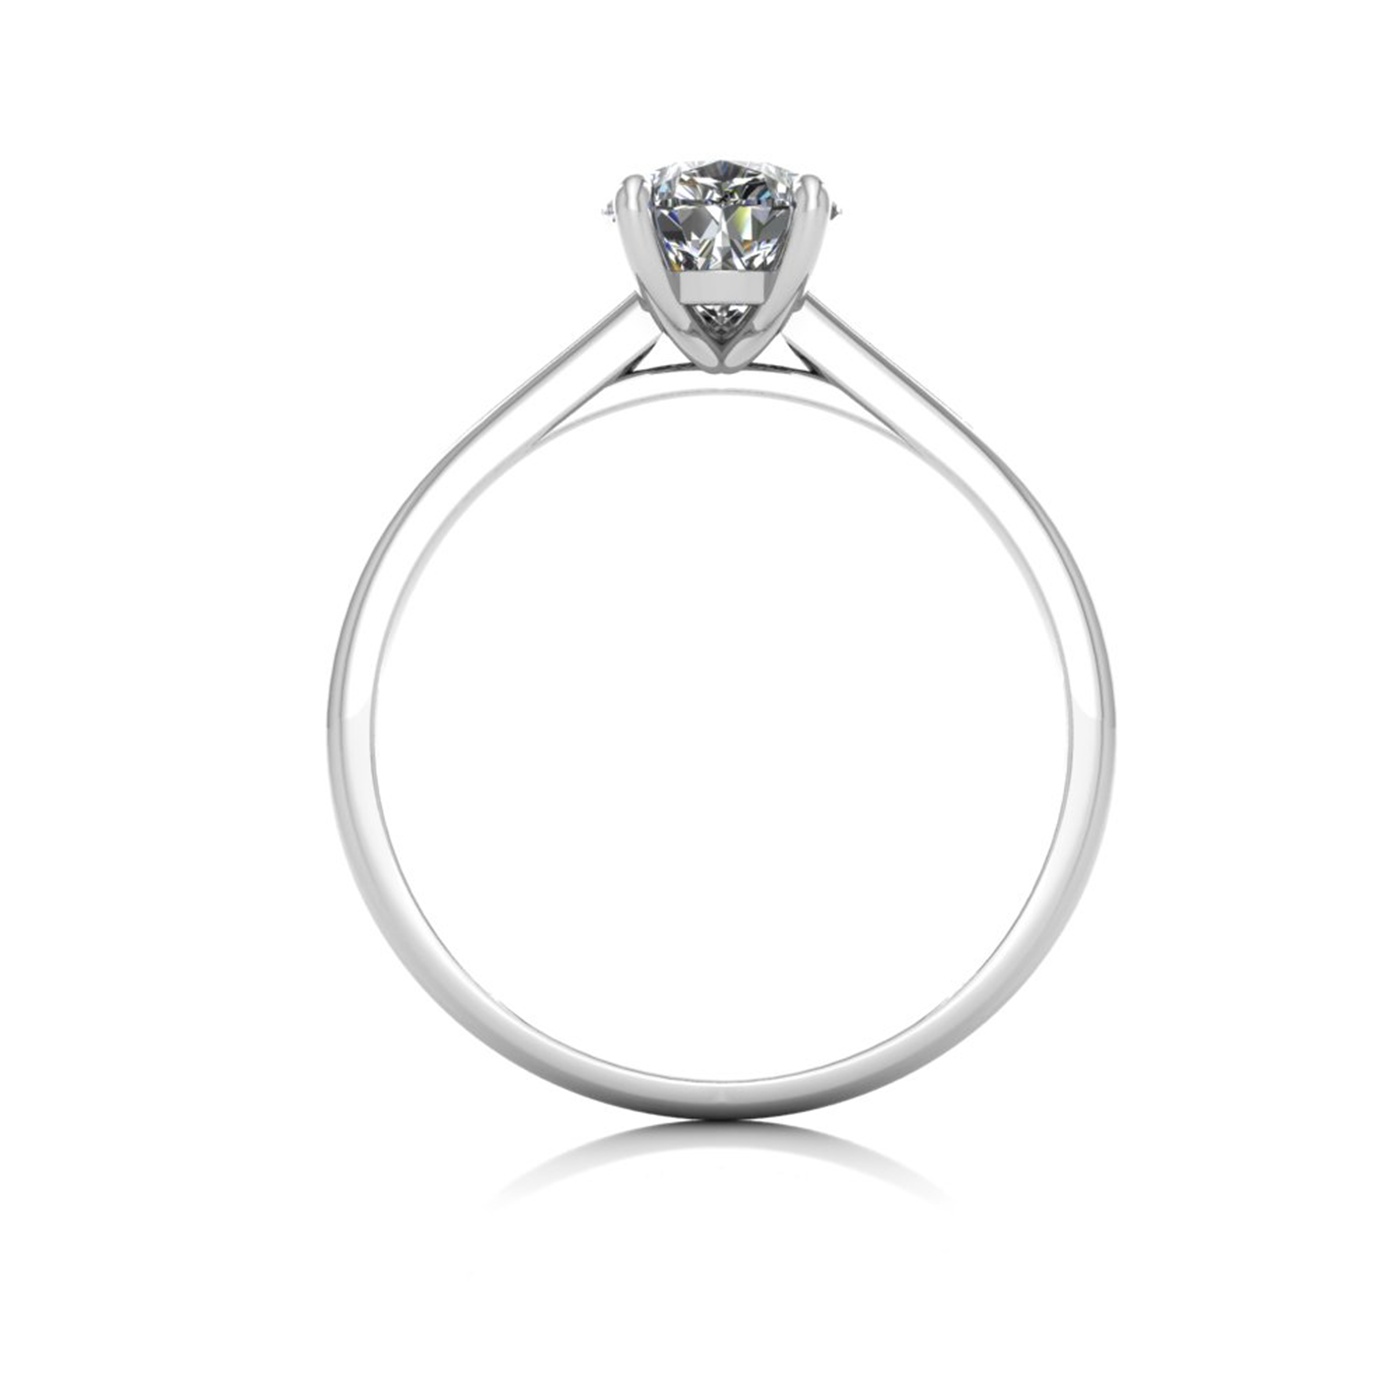 18k white gold  1,20 ct 3 prongs solitaire pear cut diamond engagement ring with whisper thin band